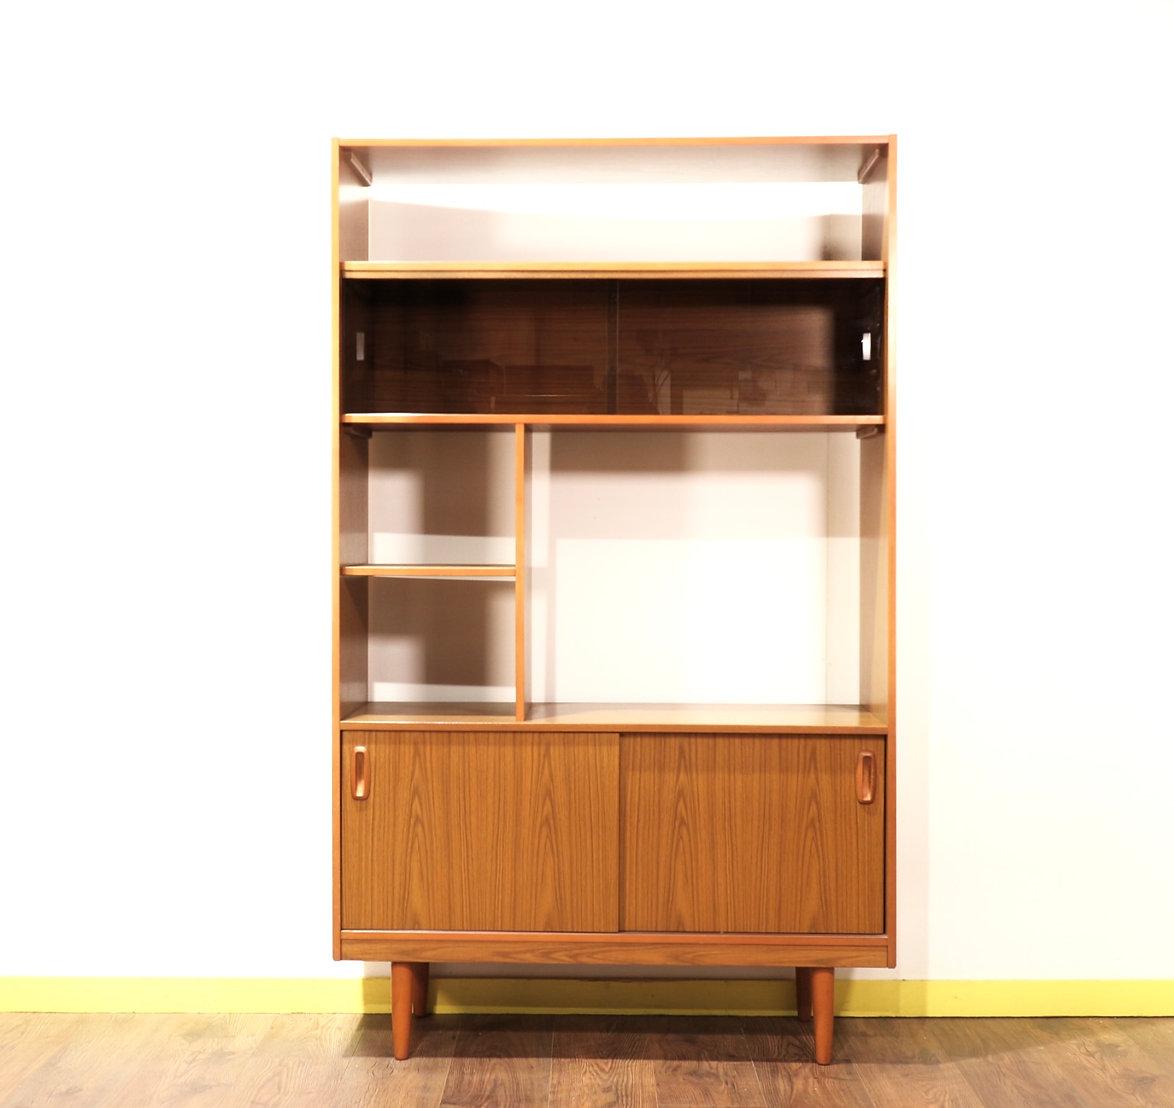 This shelf unit is typical of the Schreiber style, minimal in the danish style with great teak wood grain and distinctive recessed mounted handles.

The Company was one of the biggest names in furniture in the 70s, rivalling G Plan E Gomme and